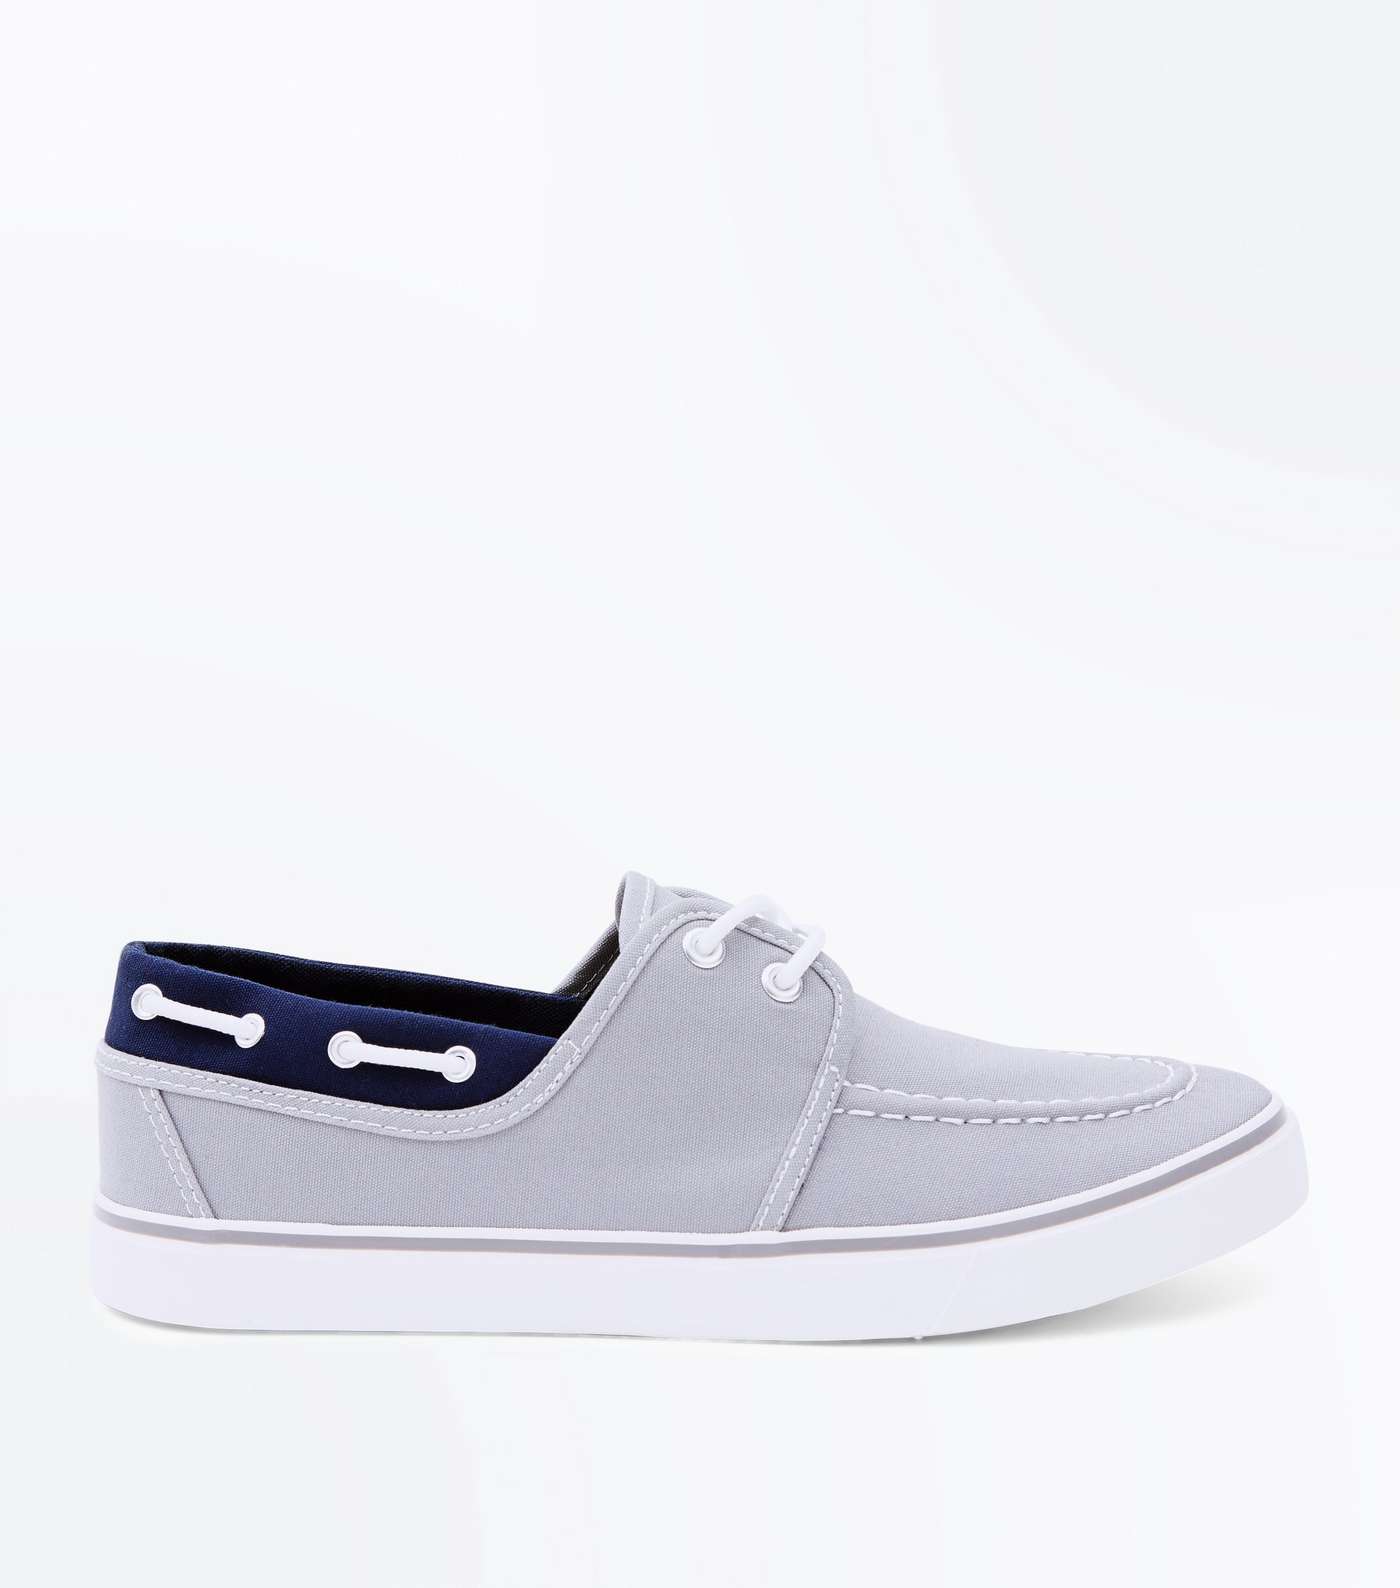 Grey Lace Up Canvas Boat Shoes